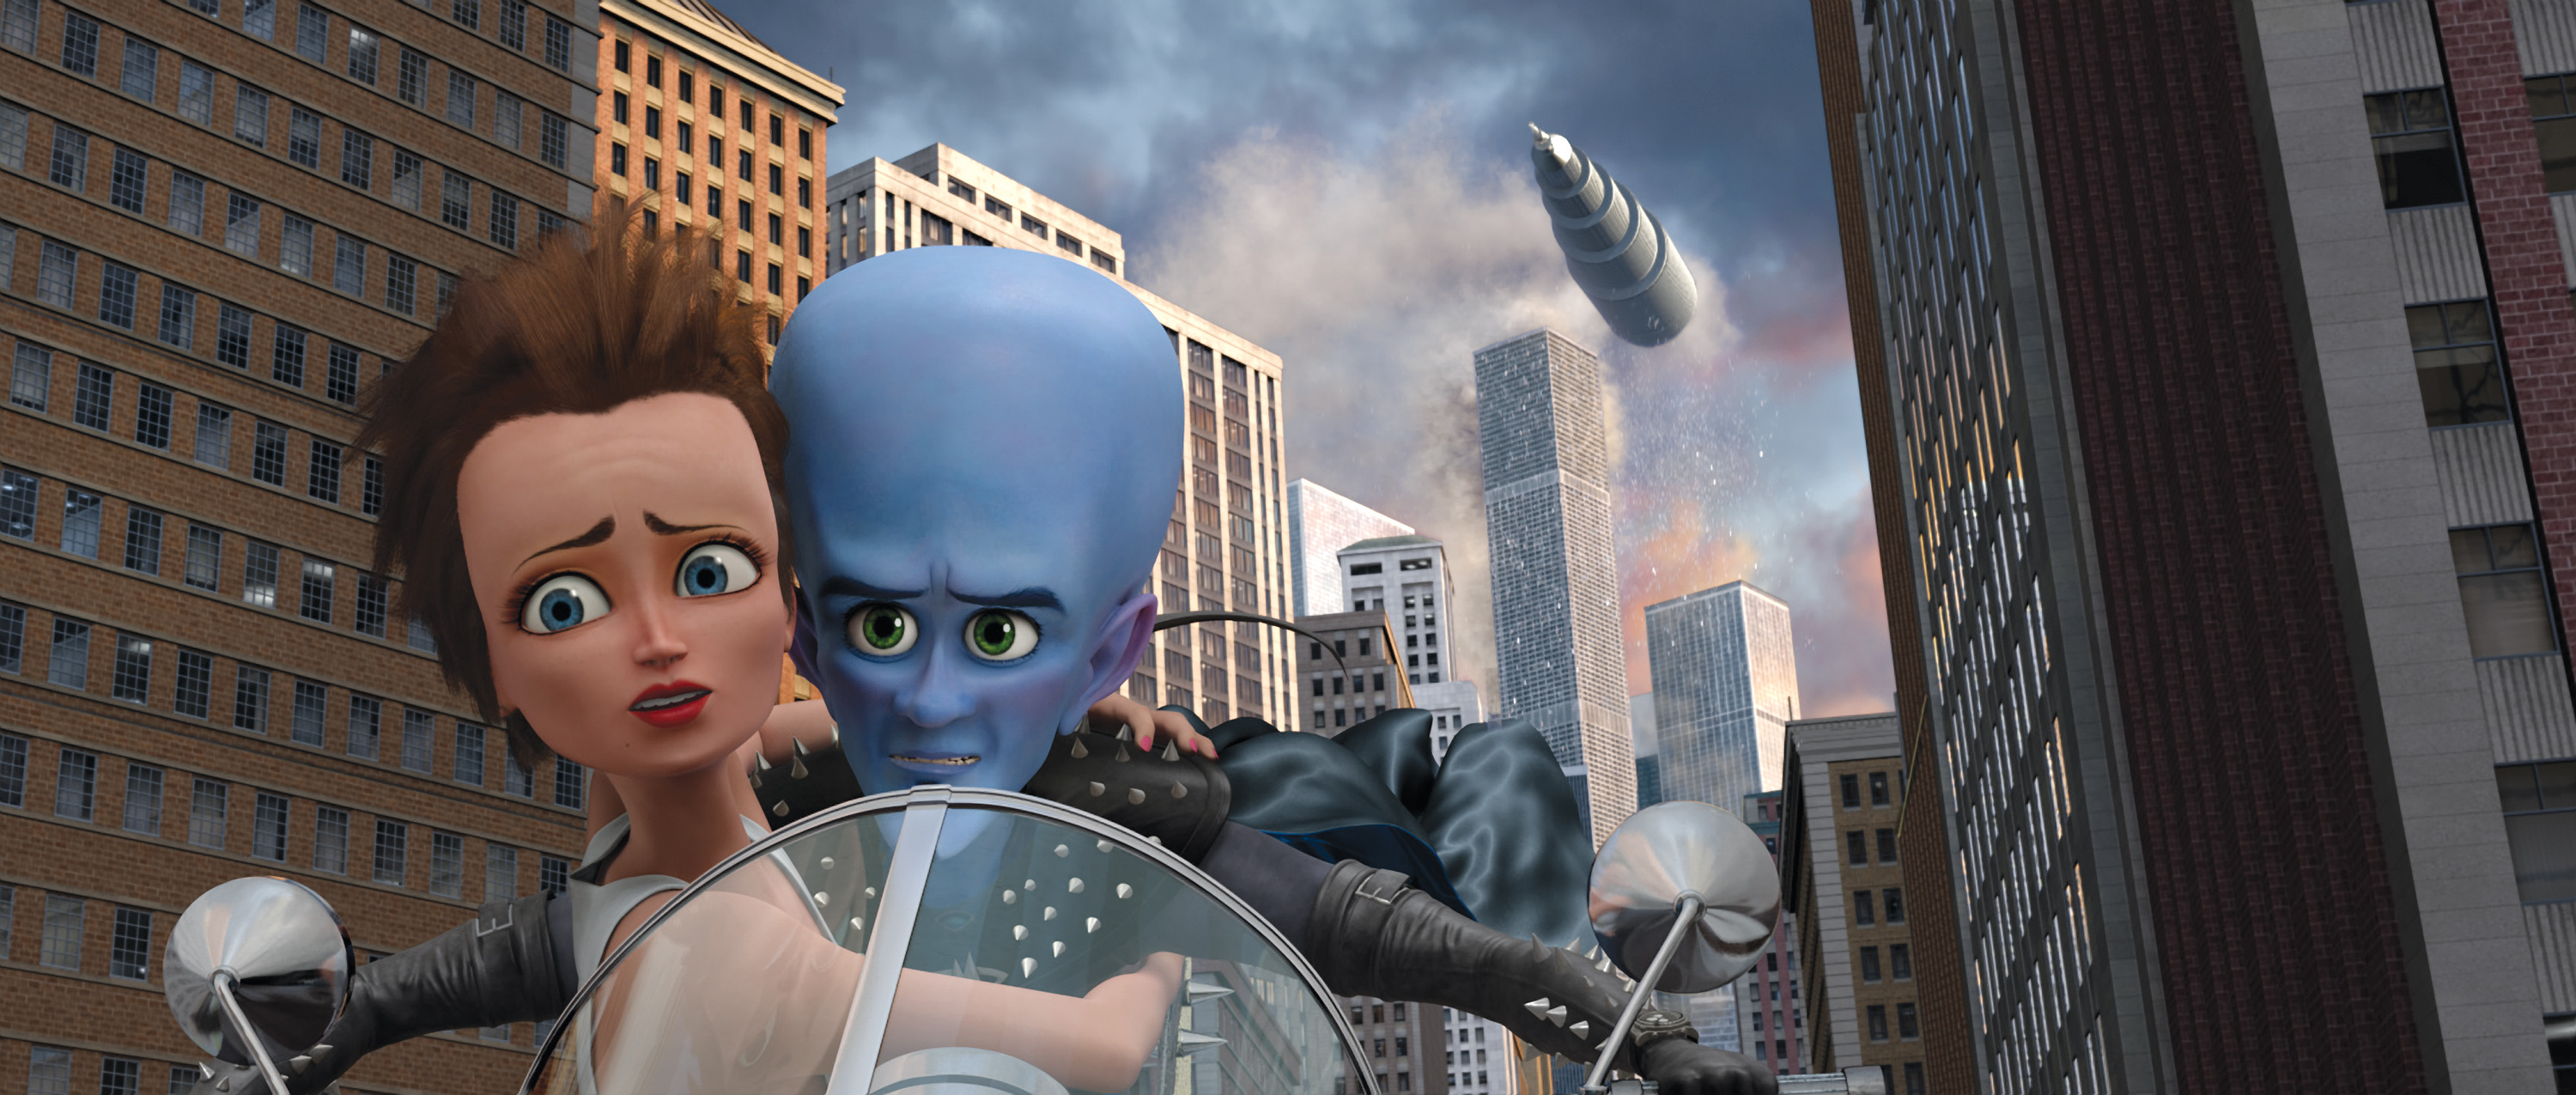 Intel's role in Megamind, Partnership with DreamWorks, Technological advancements, Movie tie-in, 3000x1280 Dual Screen Desktop